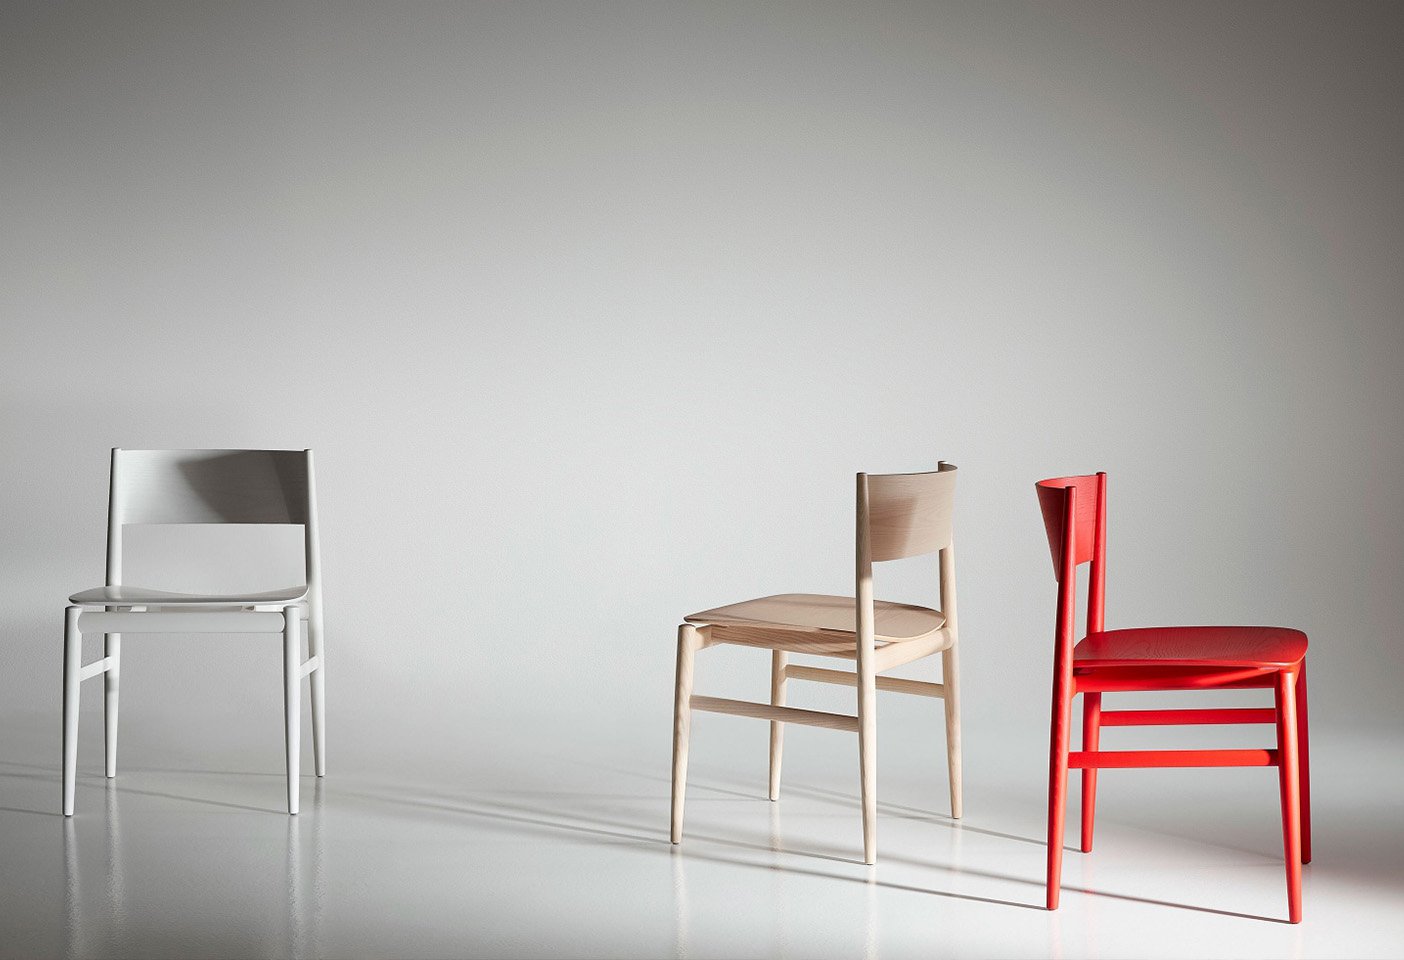 The Neve chair by Piero Lissoni for Porro, here and following. Photo c/o Porro.